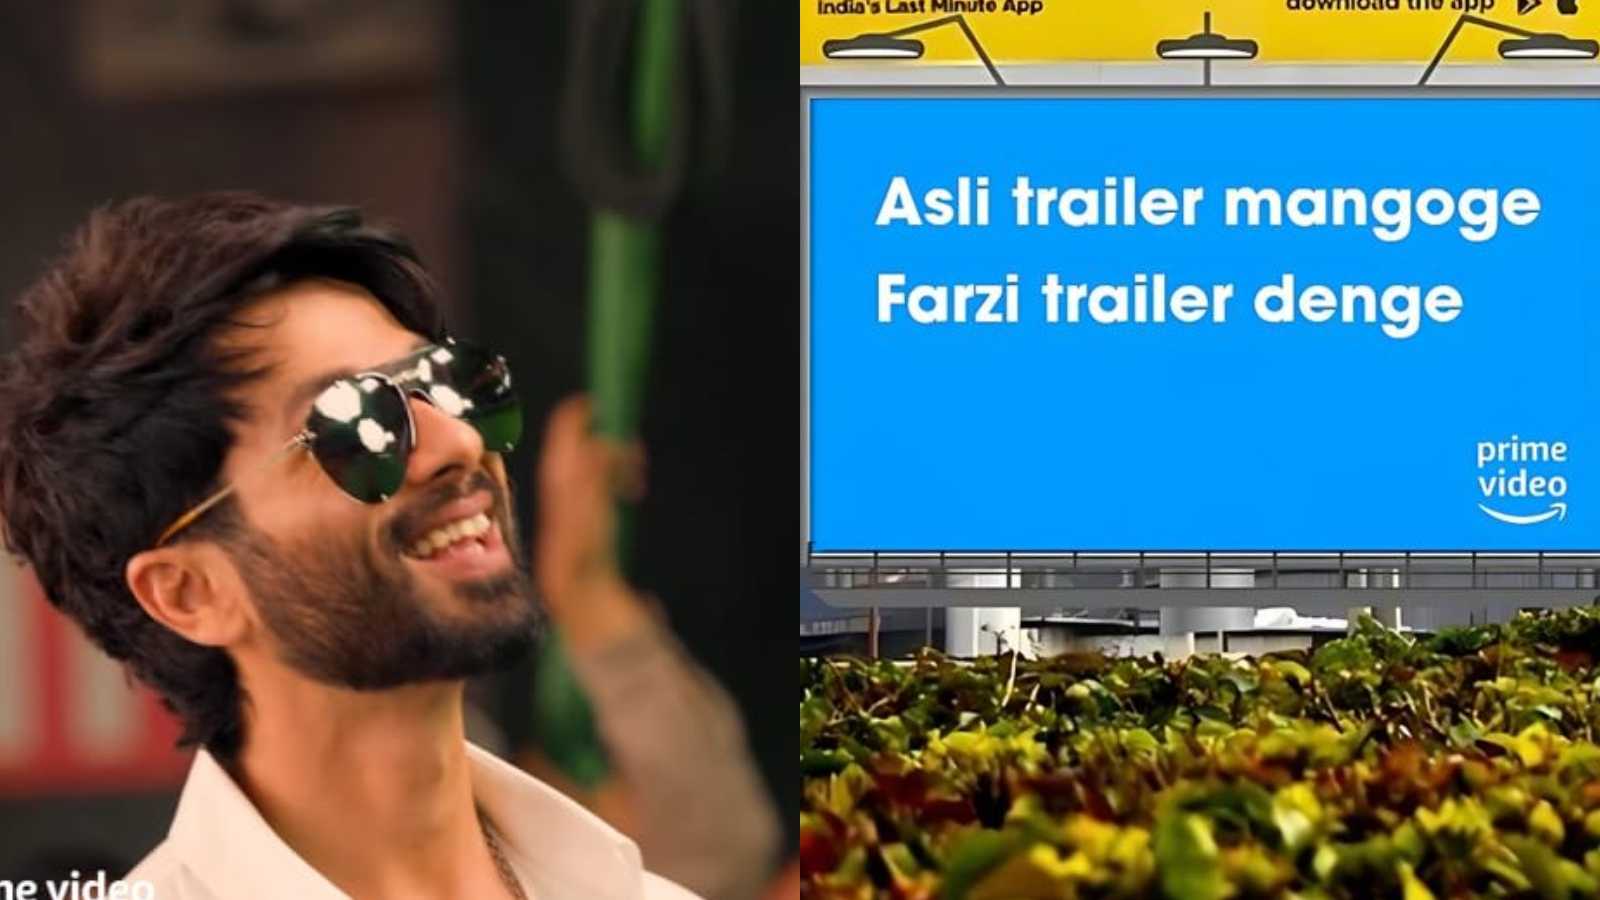 Farzi Trailer: Fake Shahid Kapoor's 'farzi trailer' of the web series scammed many, fans can't get enough of the hilarious start